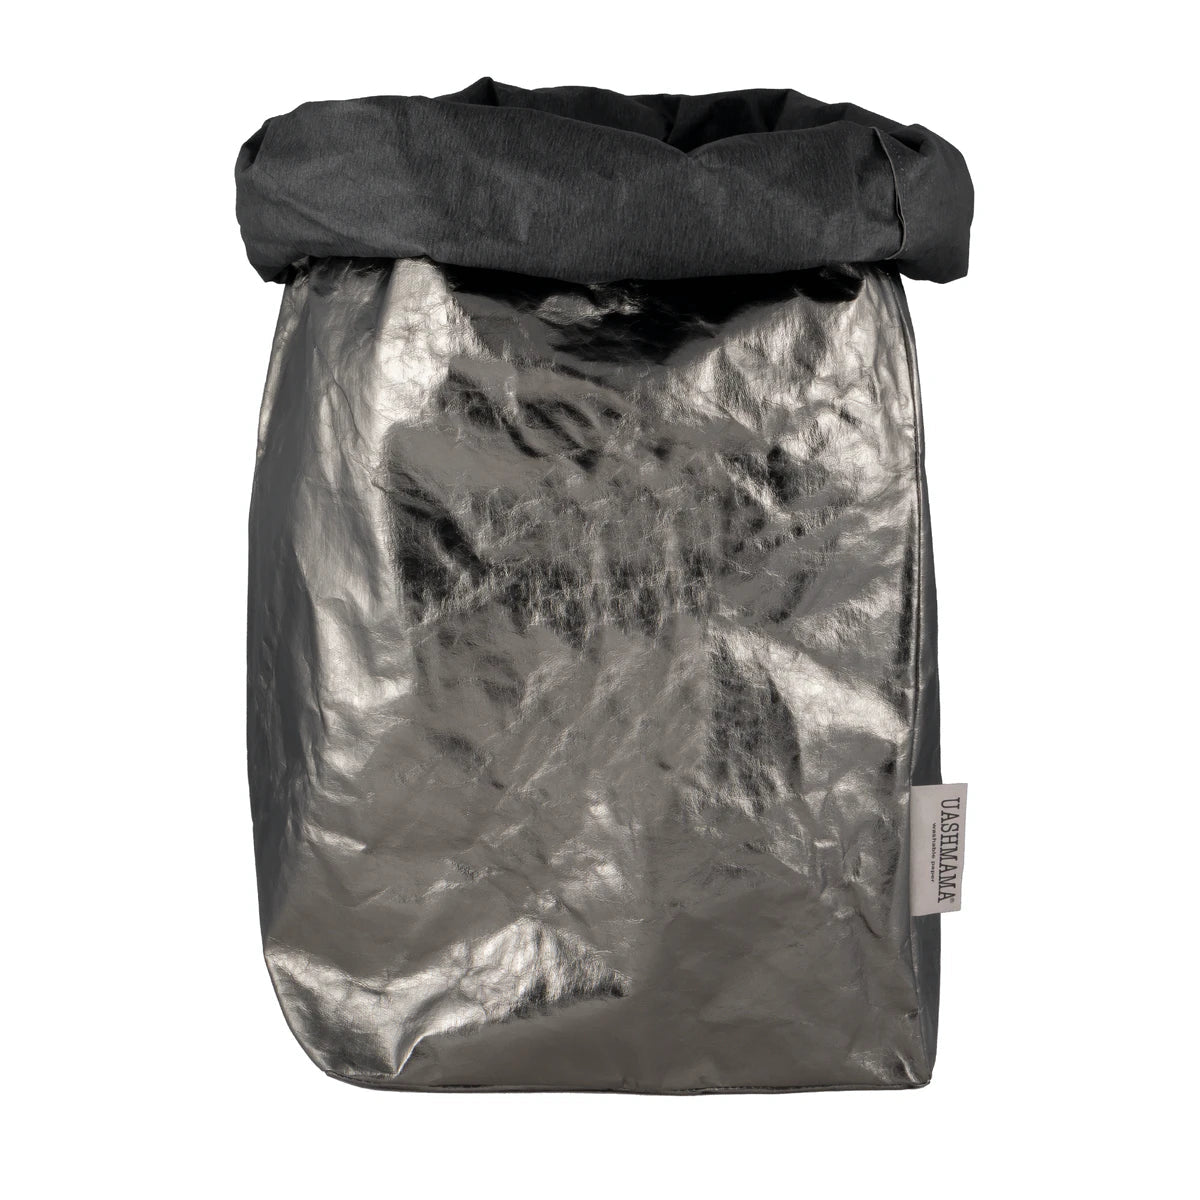 A washable paper bag is shown. The bag is rolled down at the top and features a UASHMAMA logo label on the bottom left corner. The bag pictured is the extra extra large size in dark grey metallic.